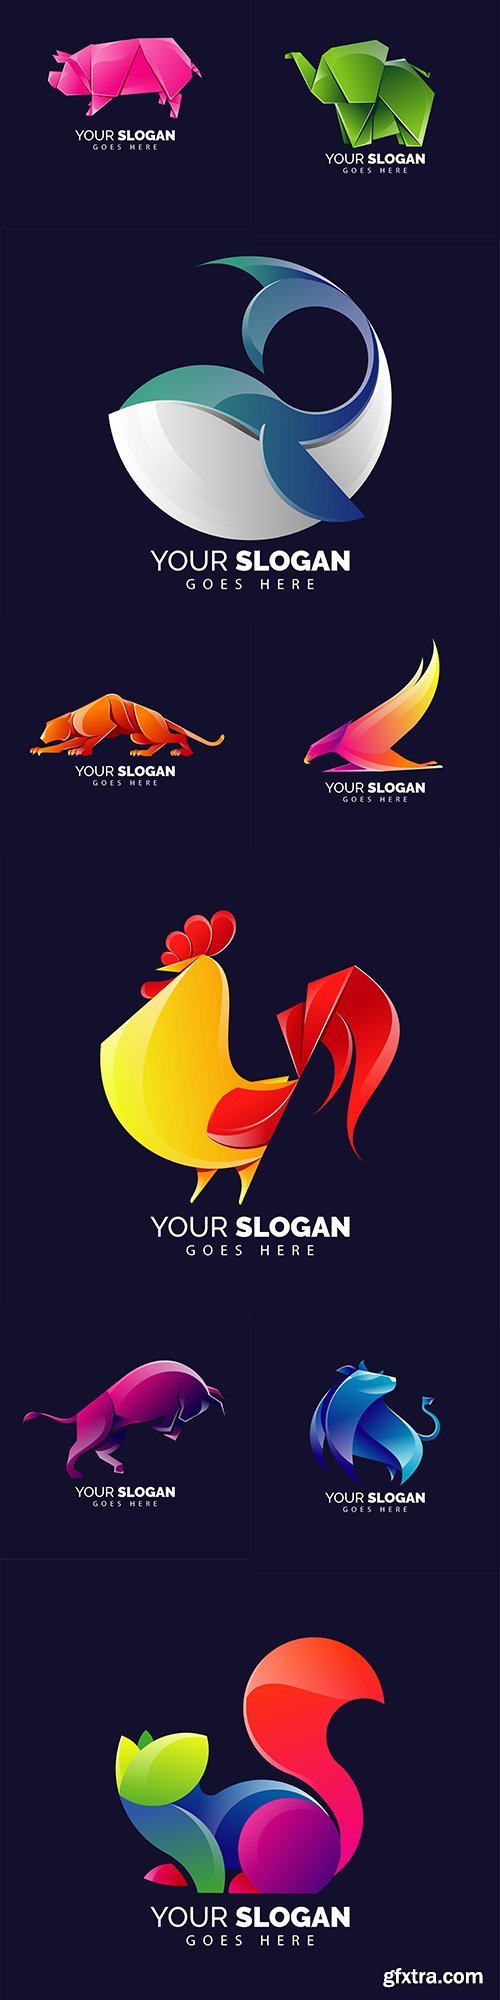 Origami logo colorful design in modern style